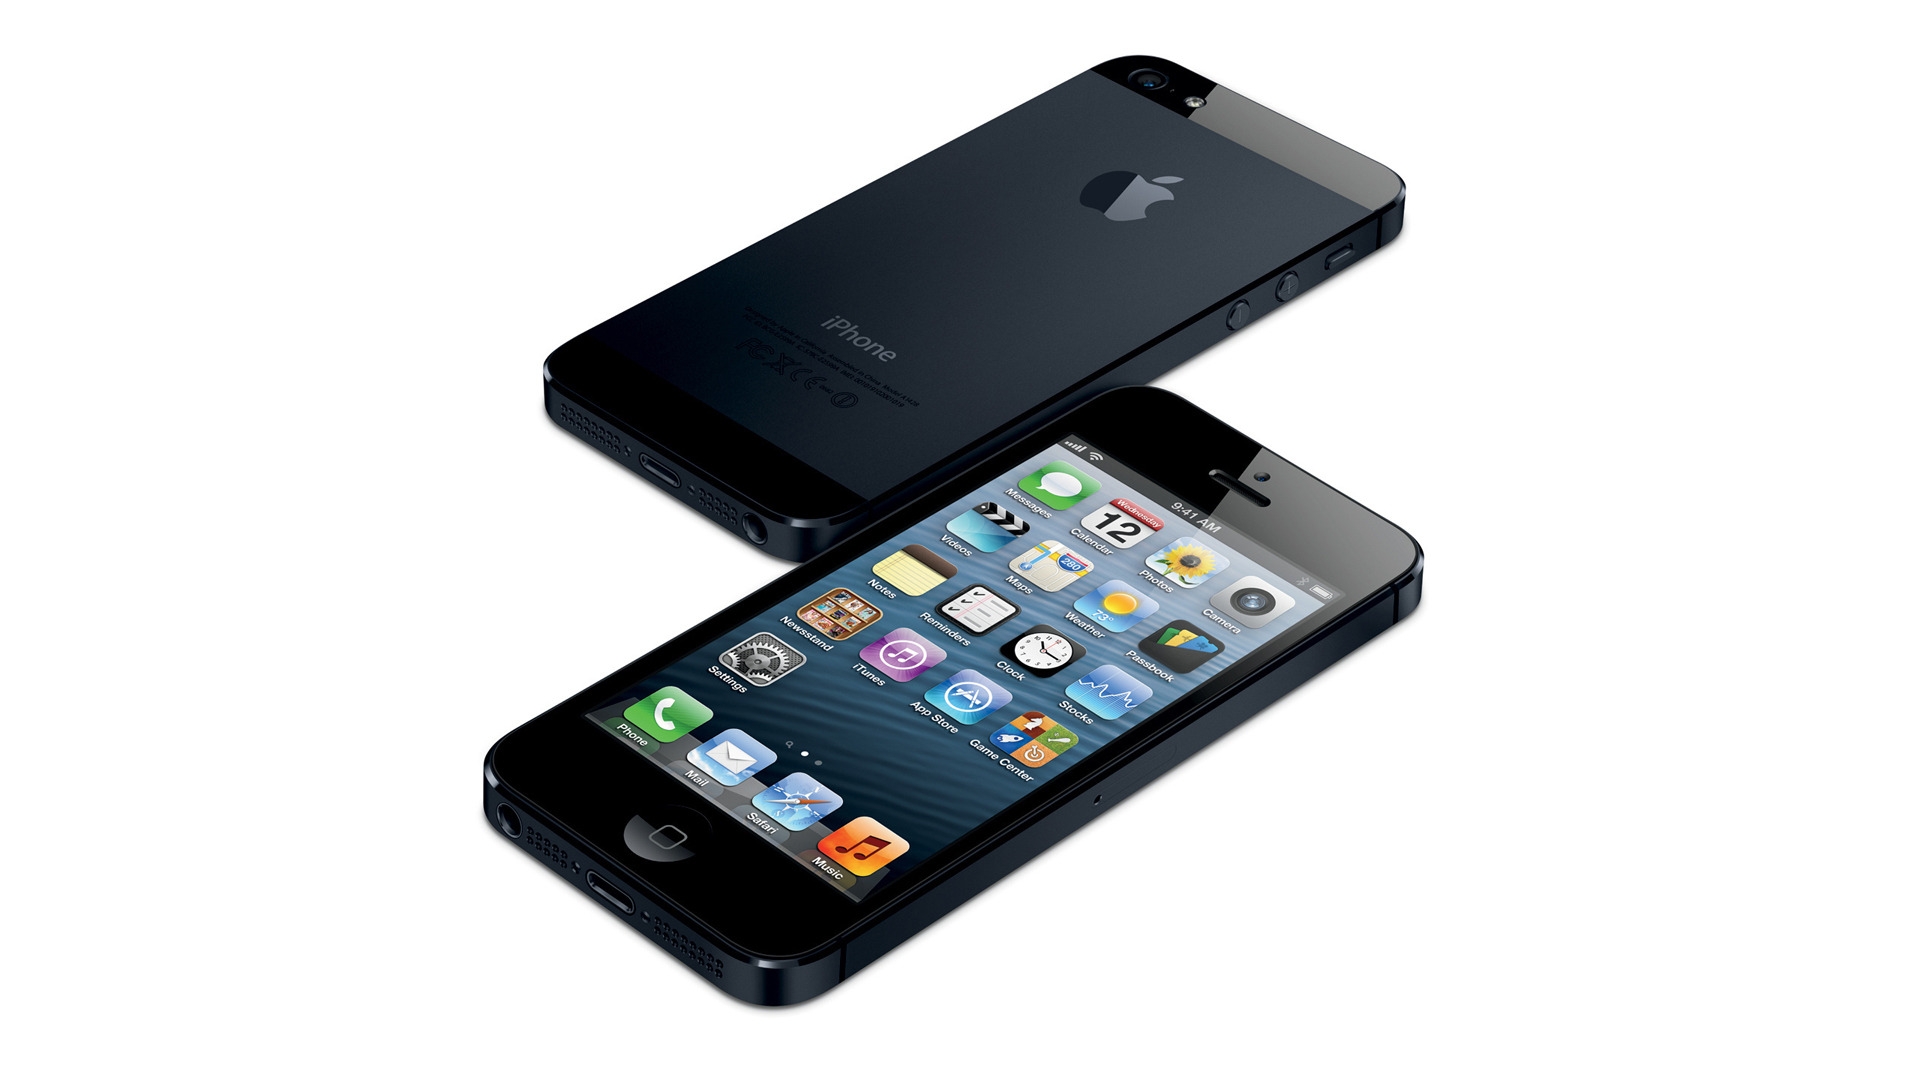 Black iPhone 5 for 1920 x 1080 HDTV 1080p resolution